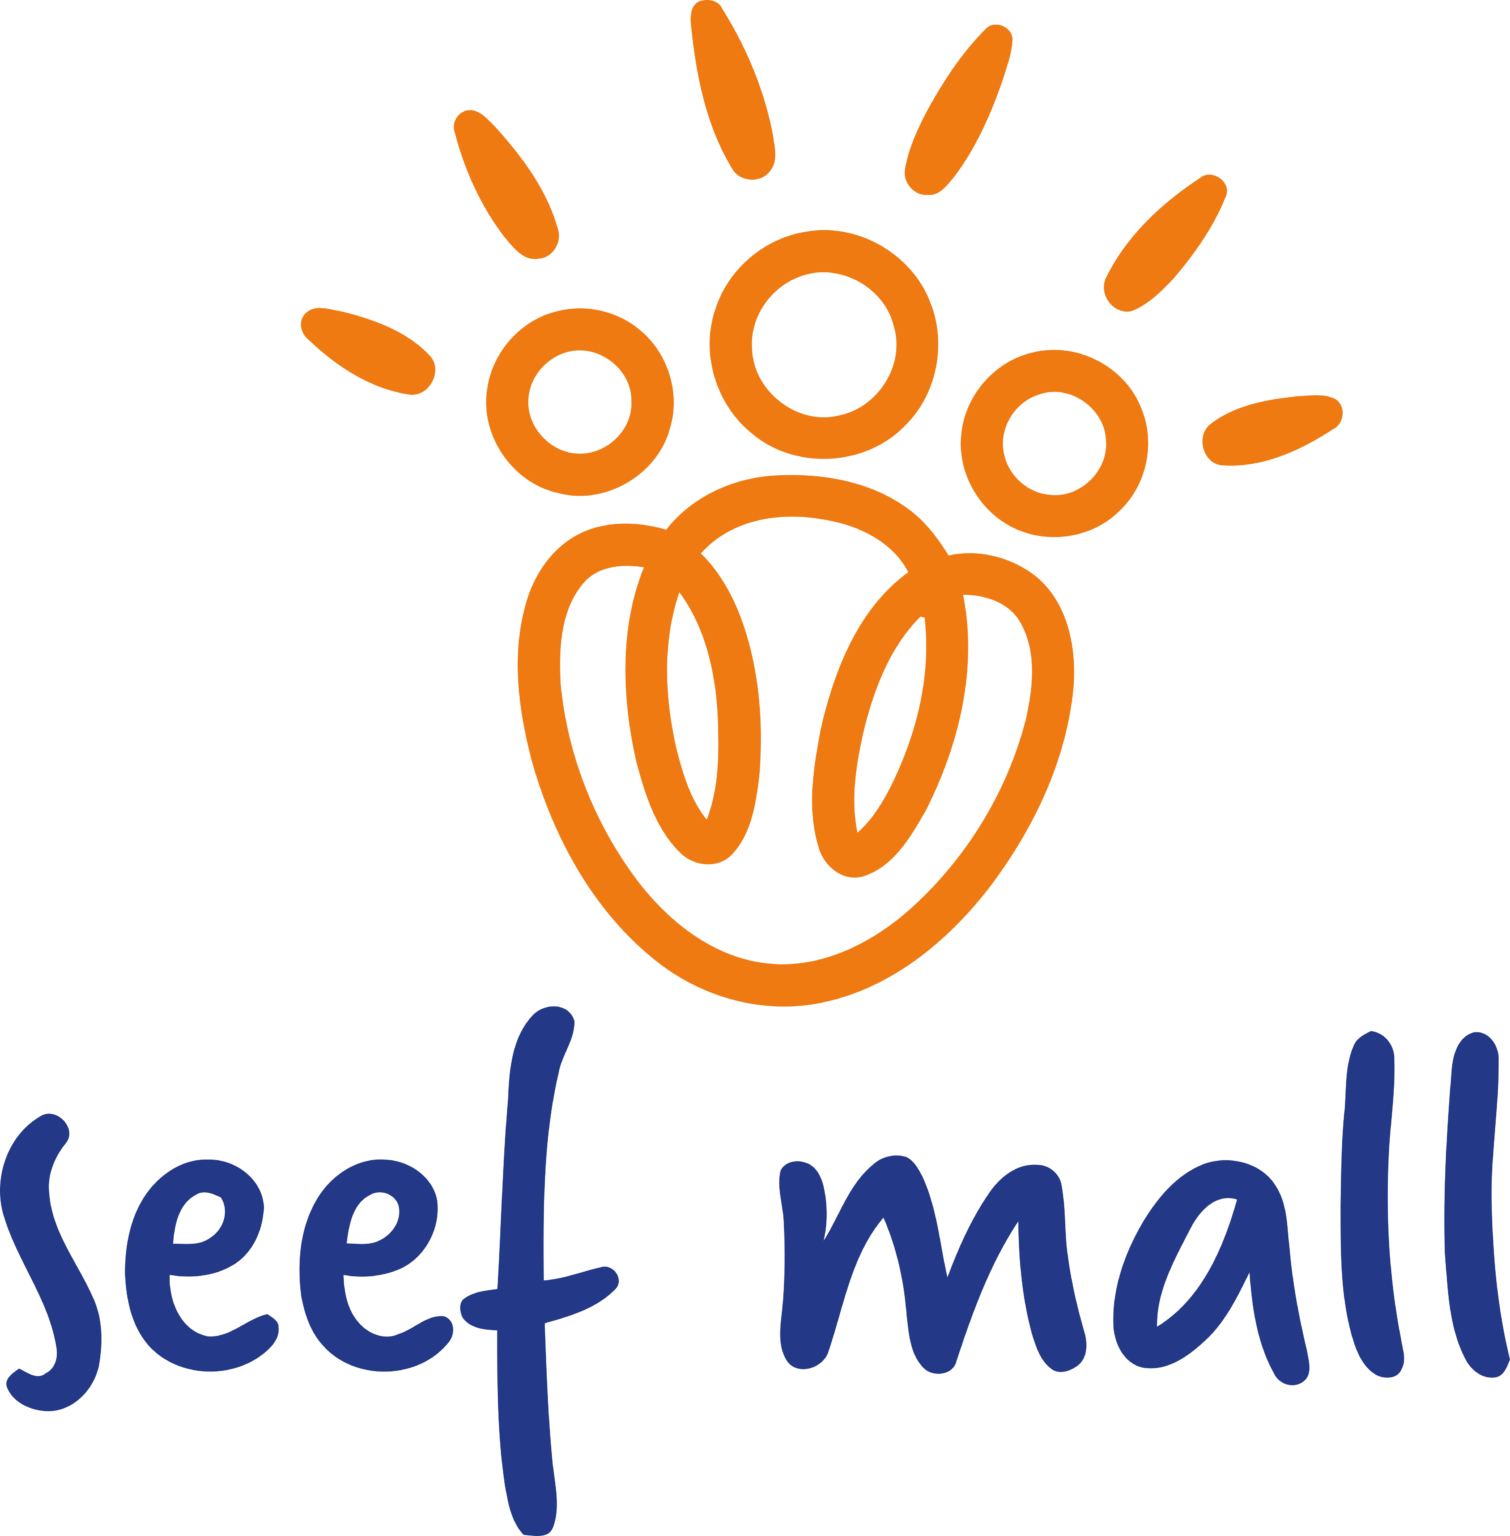 Seef Mall – Logos Download